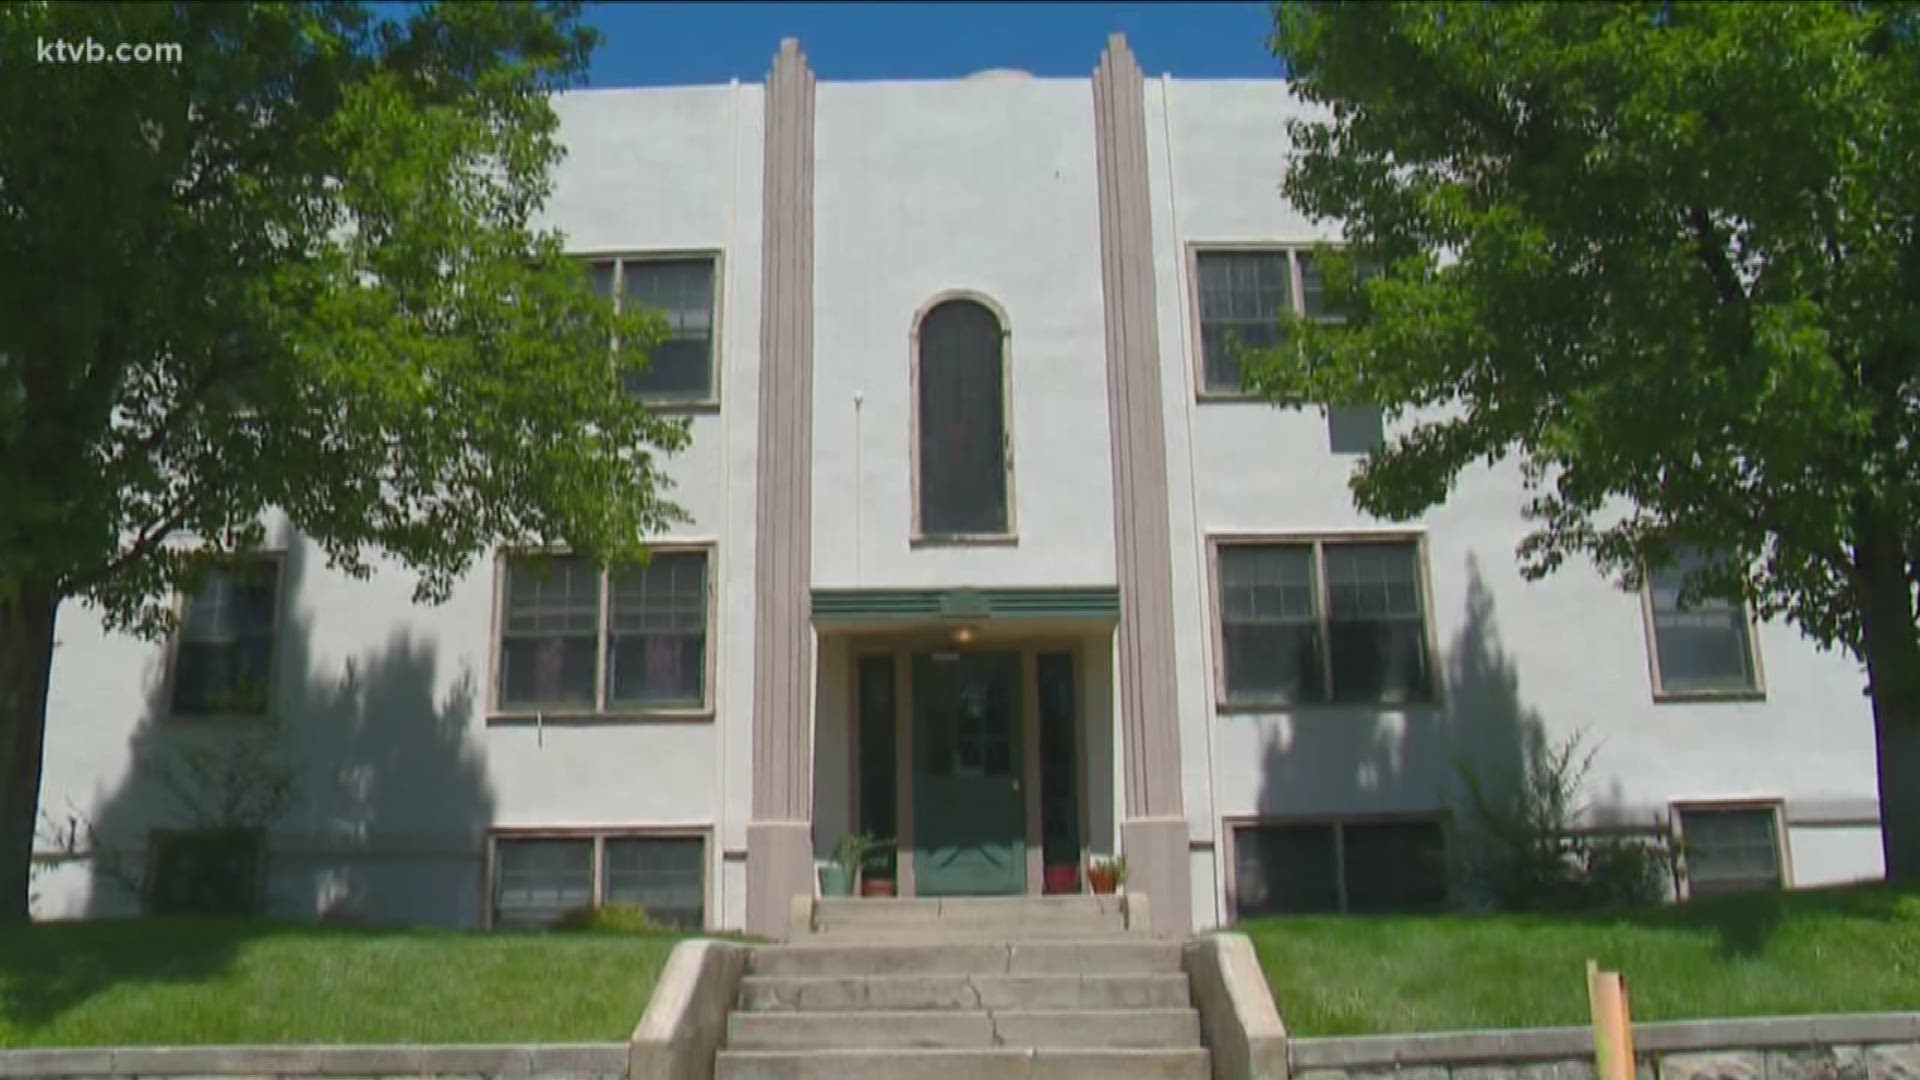 The Boise City Council is expected to vote on whether to rezone the Travis Apartments.